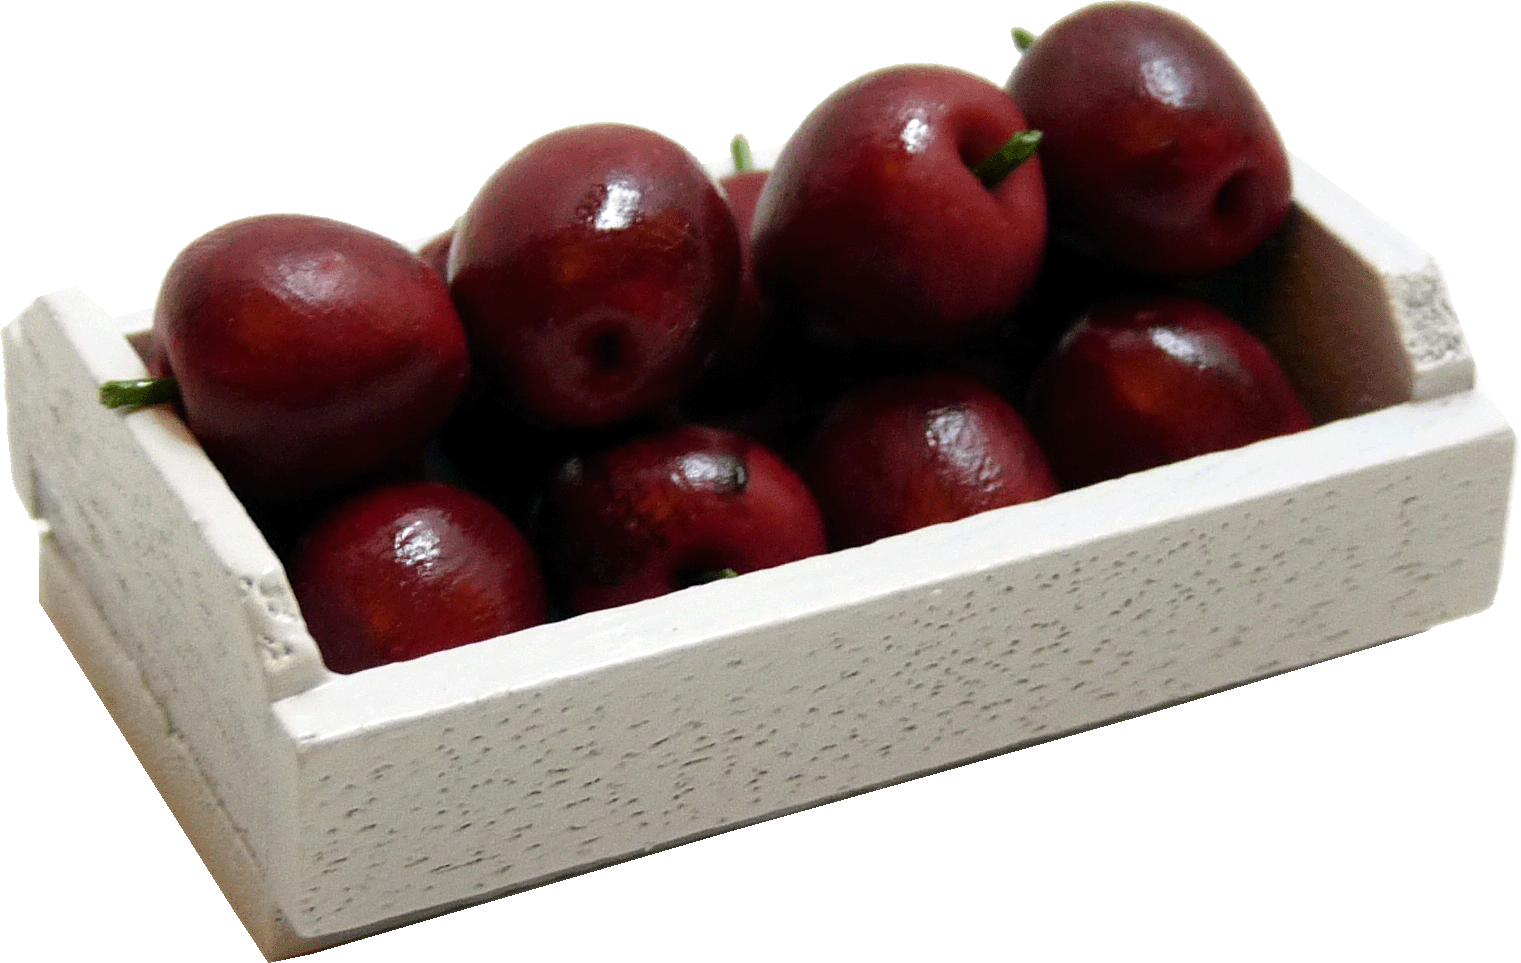 Apples in Whitewashed Crate